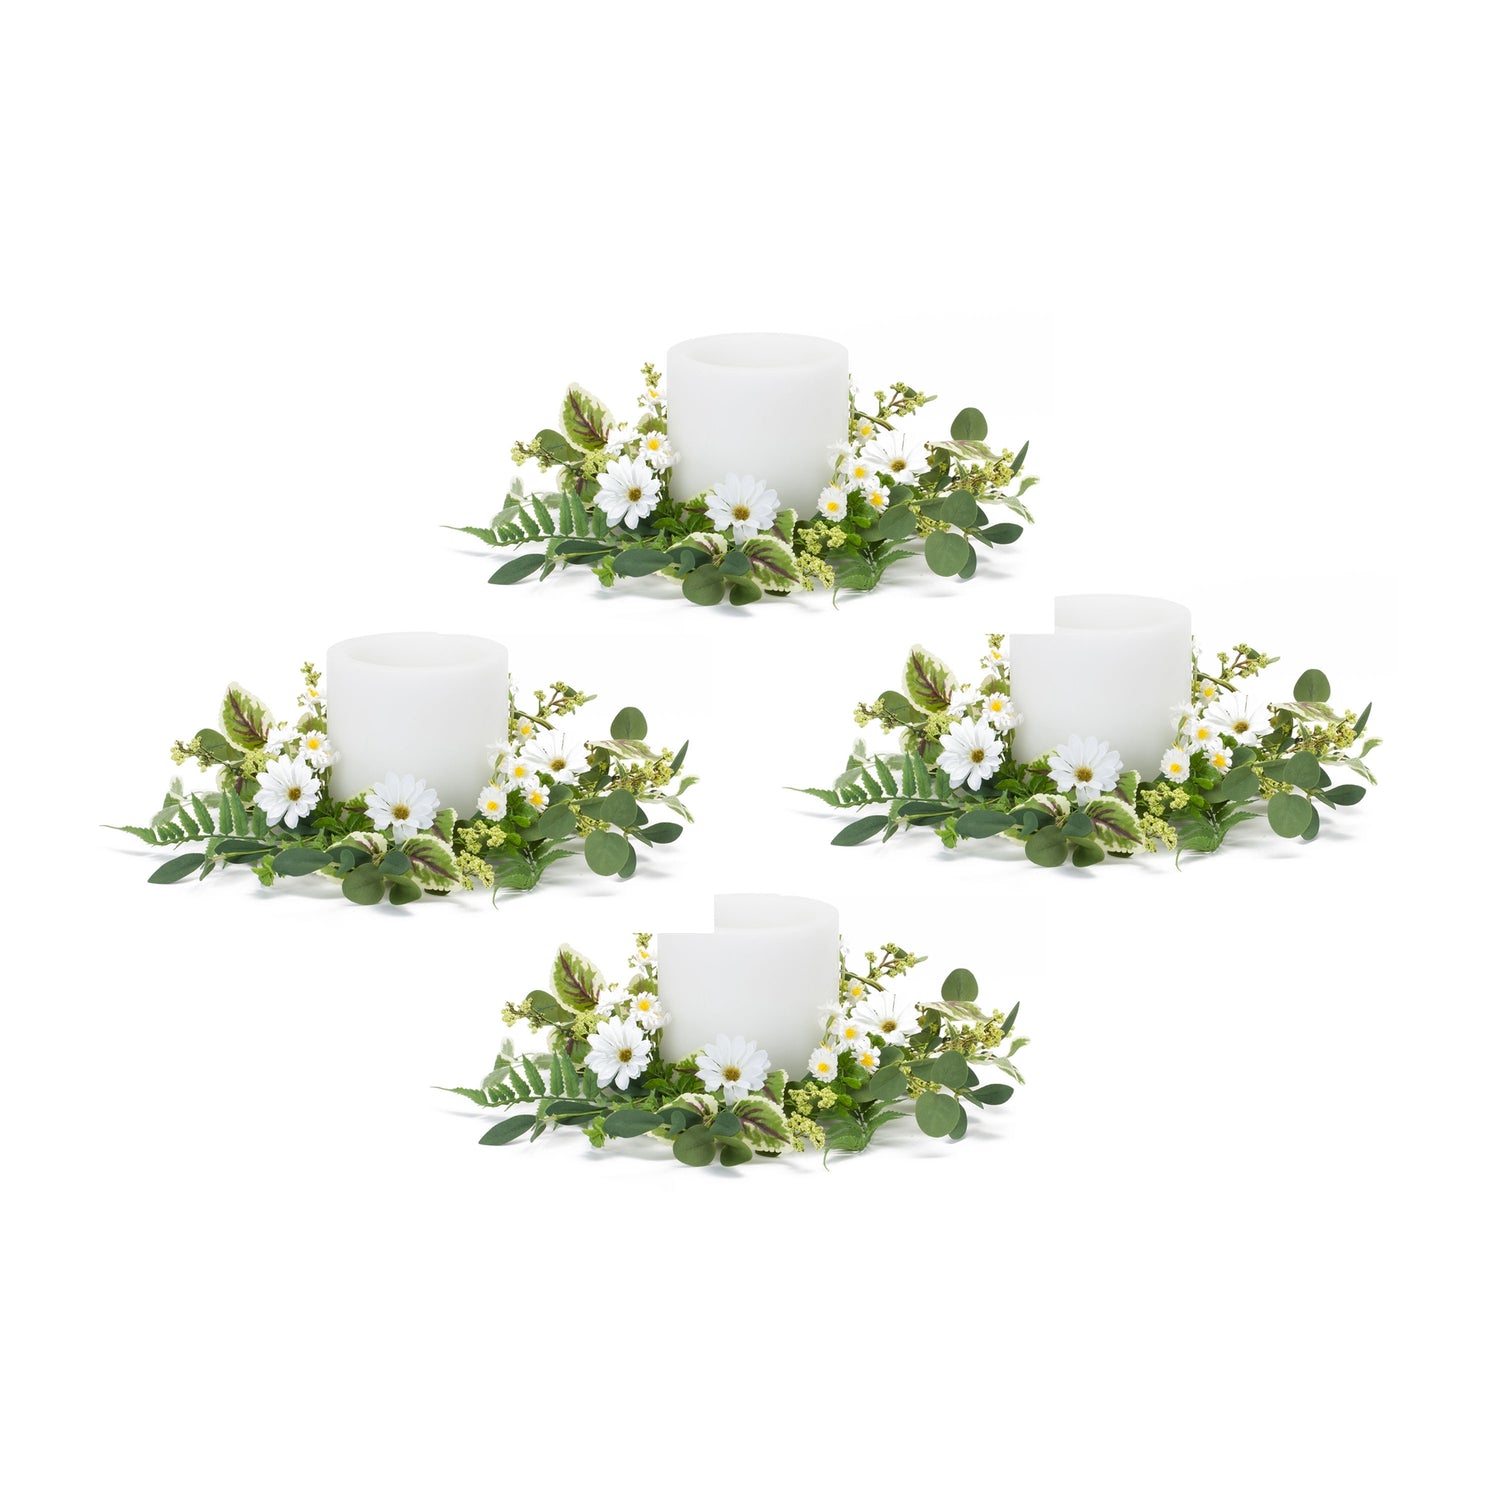 Mixed Floral Wreath (Set of 4) 17"D Polyester/Plastic